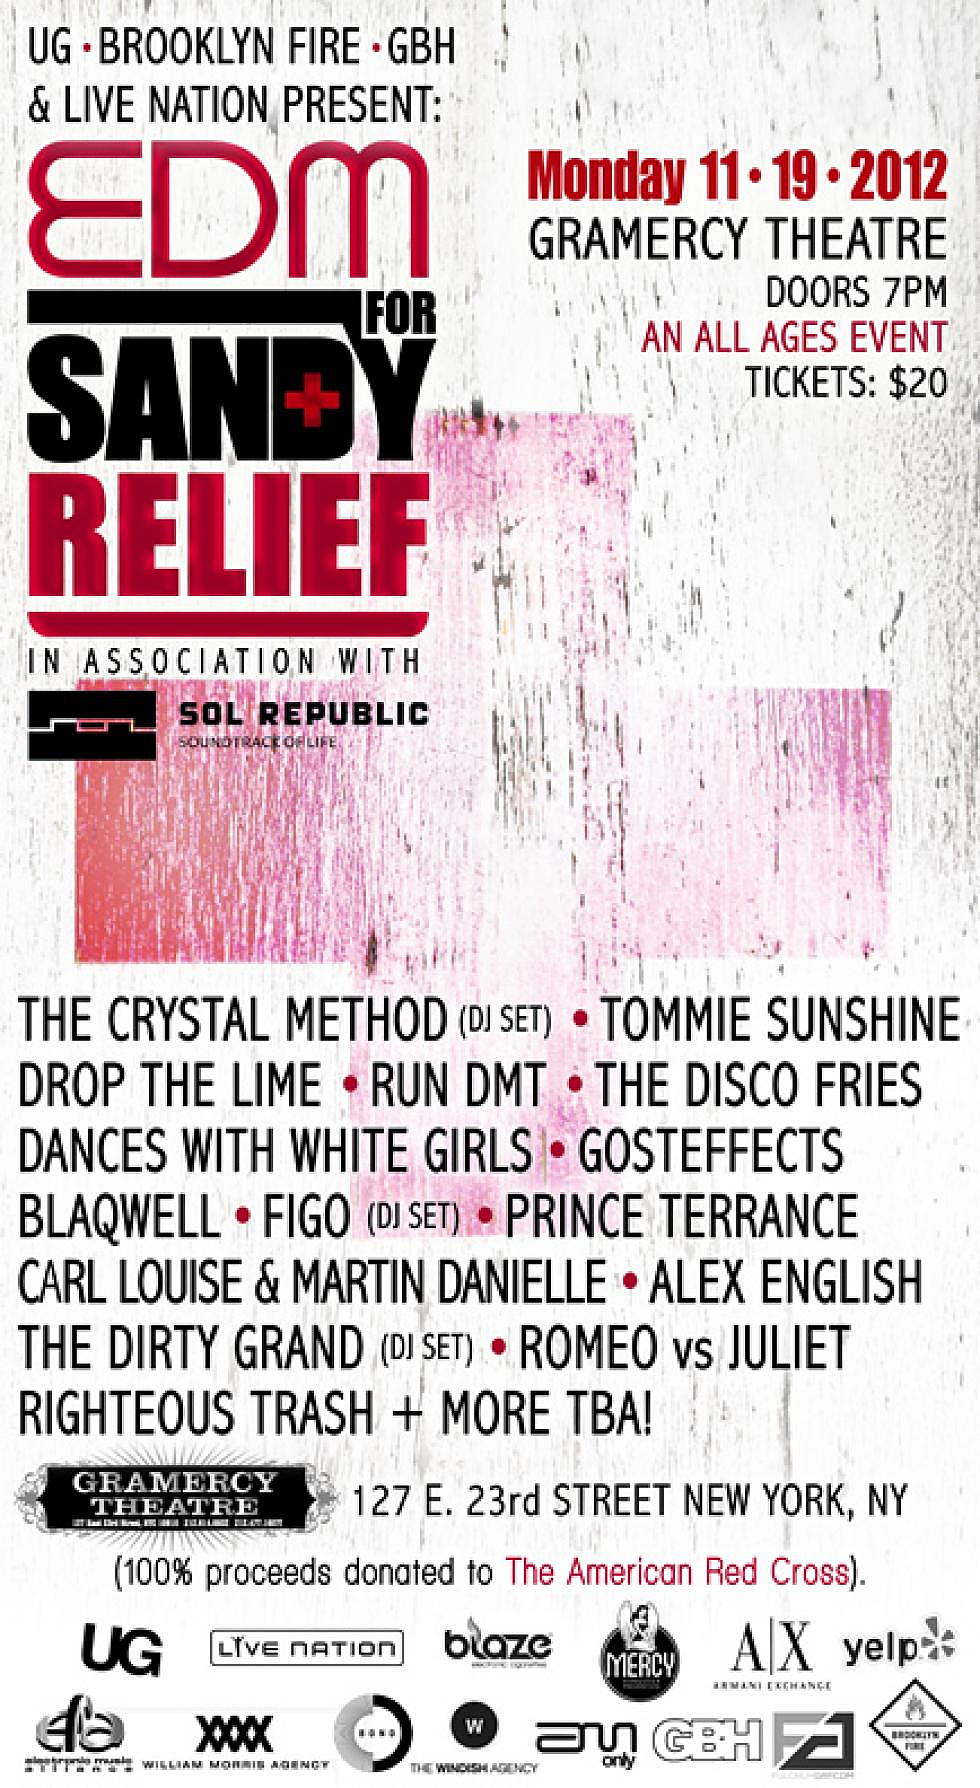 UG + BROOKLYN FIRE + GBH + LIVE NATION PRESENT: EDM FOR SANDY RELIEF IN ASSOCIATION WITH SOL REPUBLIC